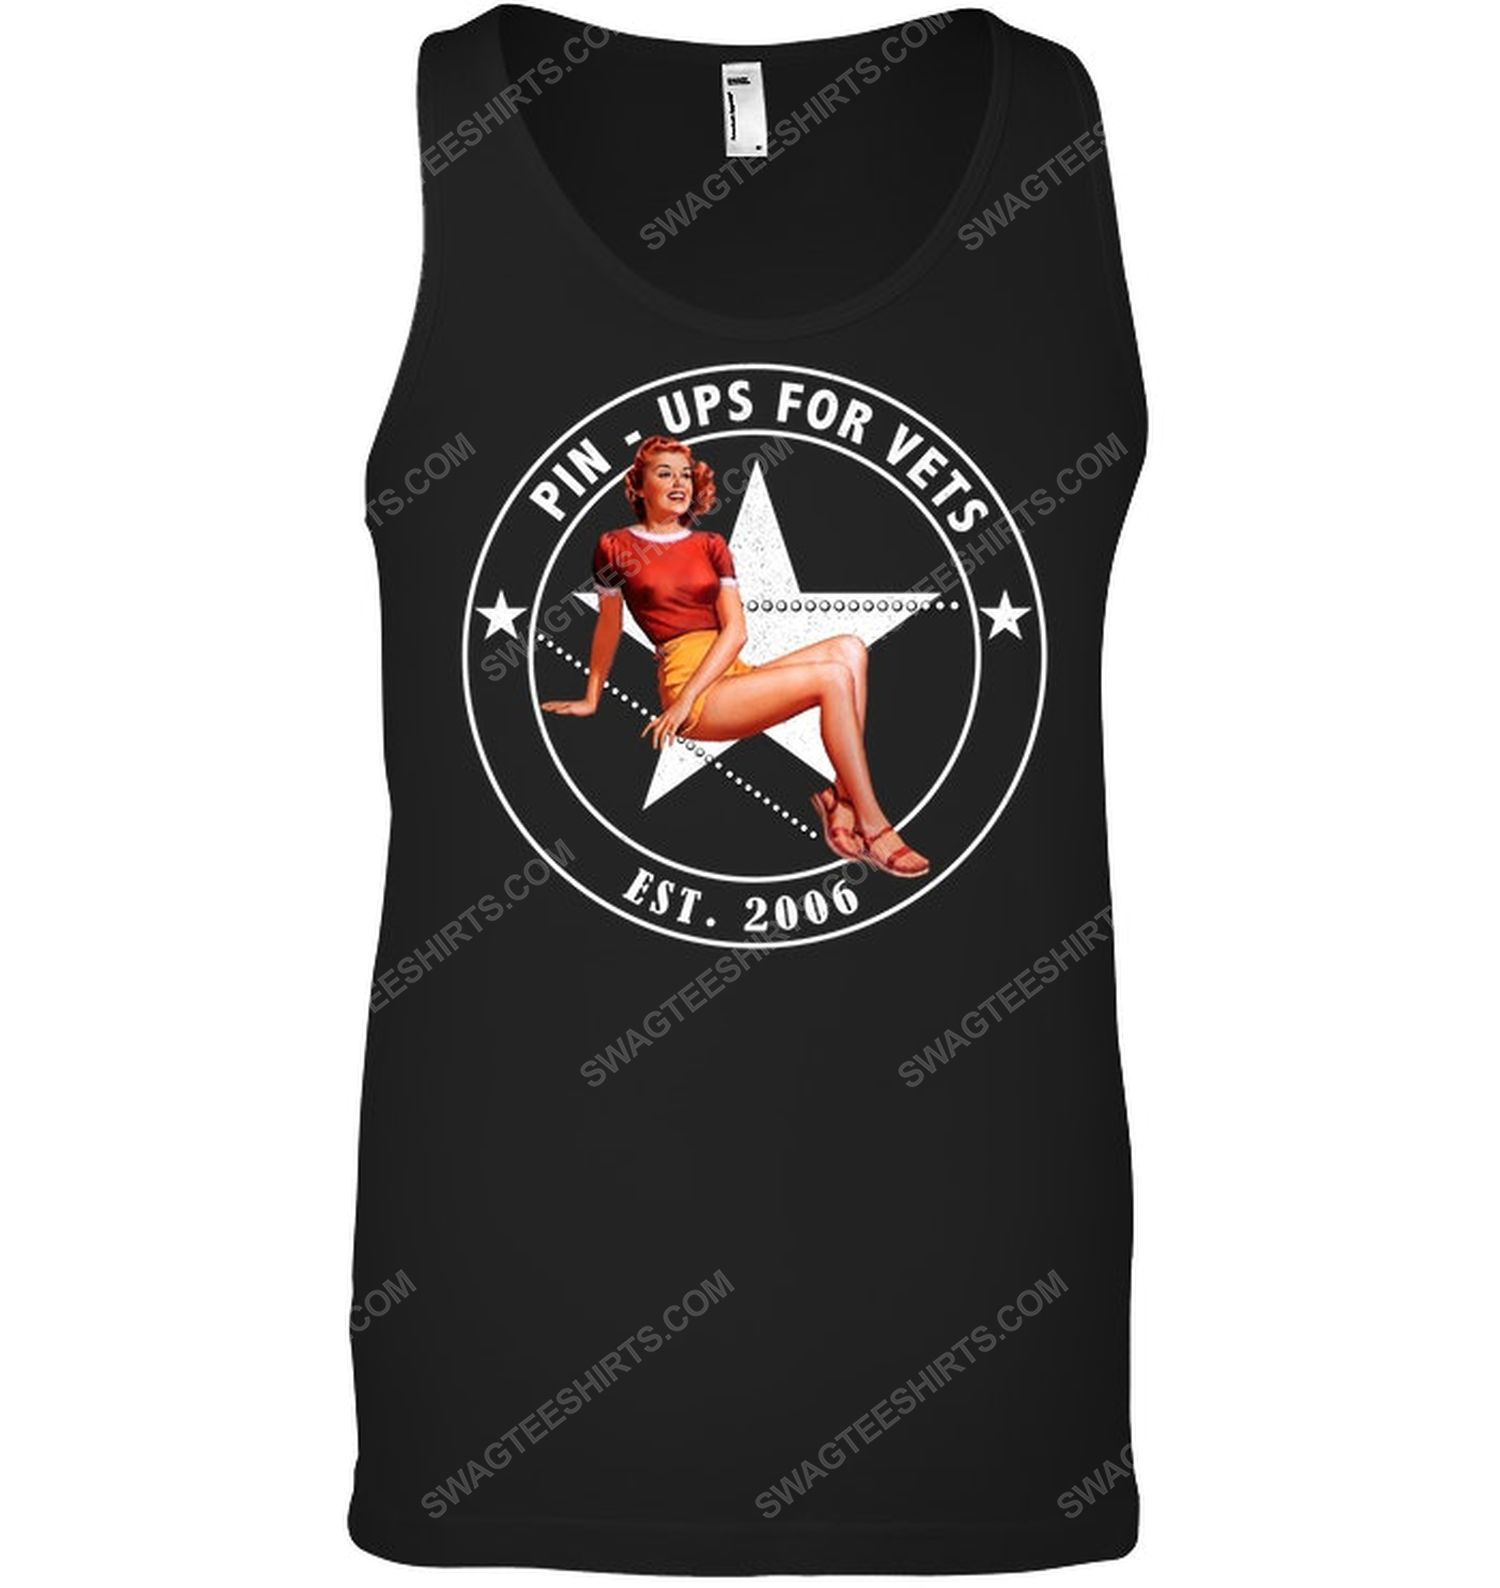 Pin up girl pin ups for vets est 2006 tank top